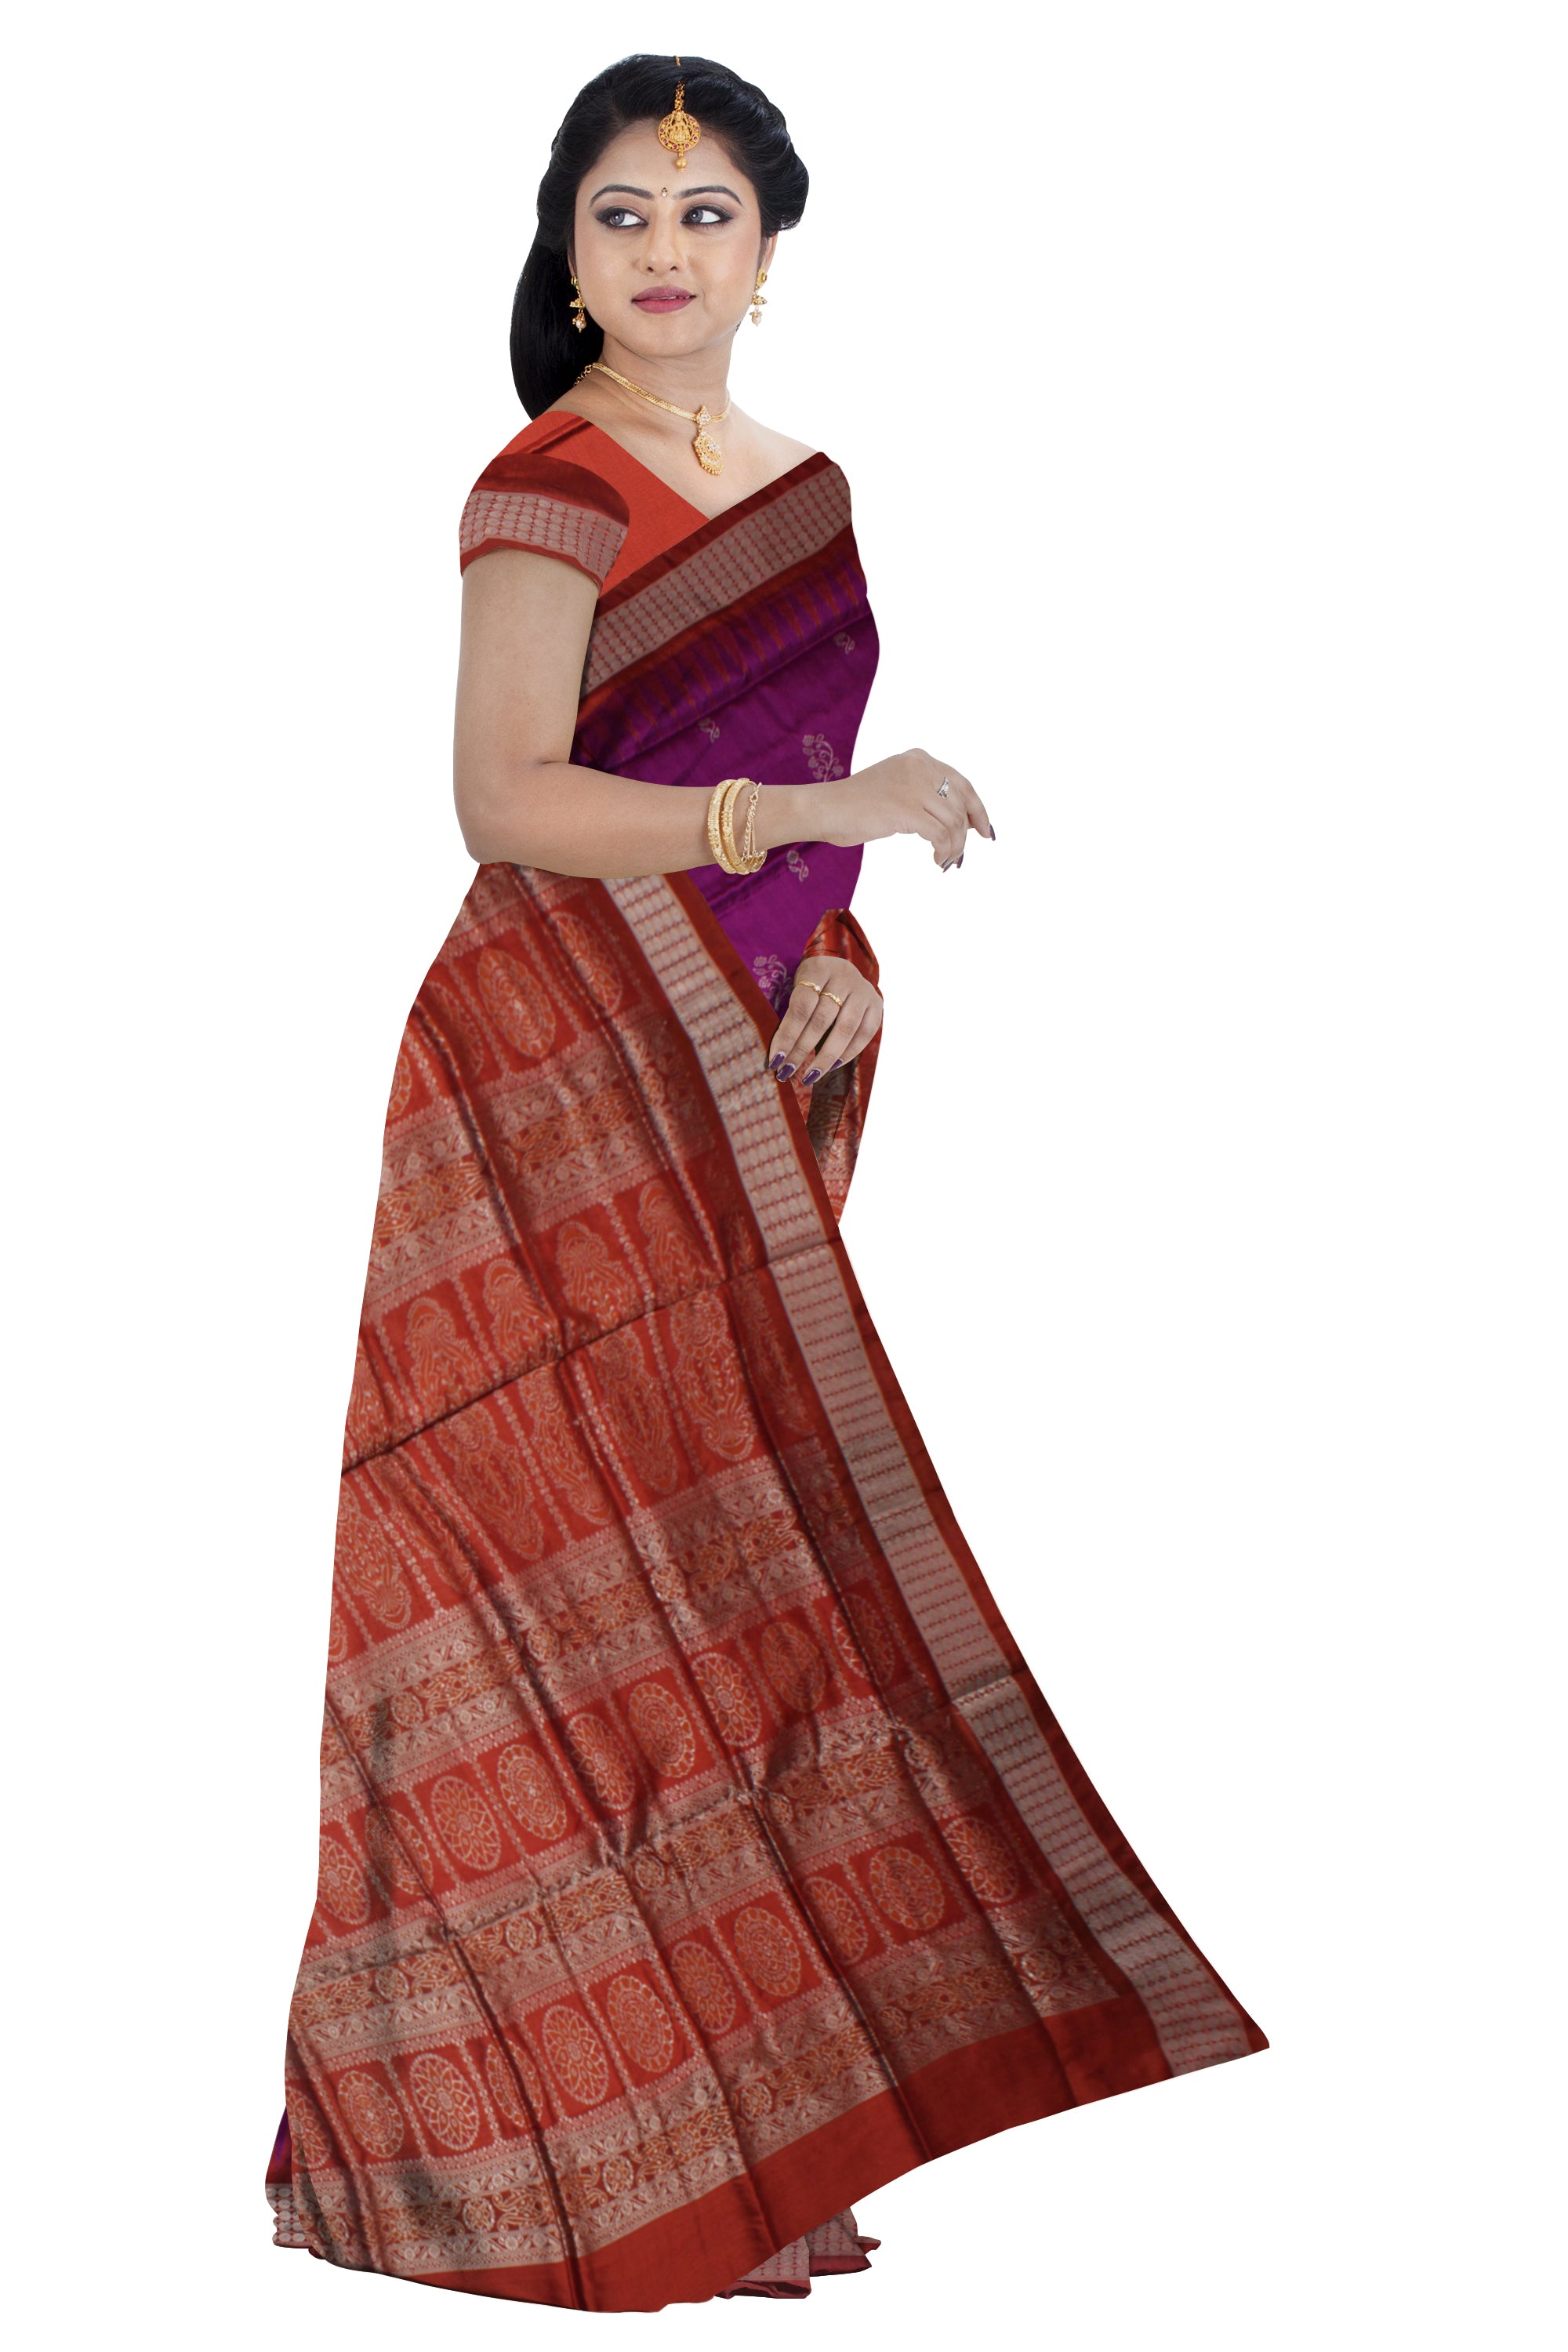 LATEST DESIGN SMALL FLOWER PATTERN PURPLE AND MAROON COLOR PATA SAREE, WITH MATCHING BLOUSE PIECE. - Koshali Arts & Crafts Enterprise